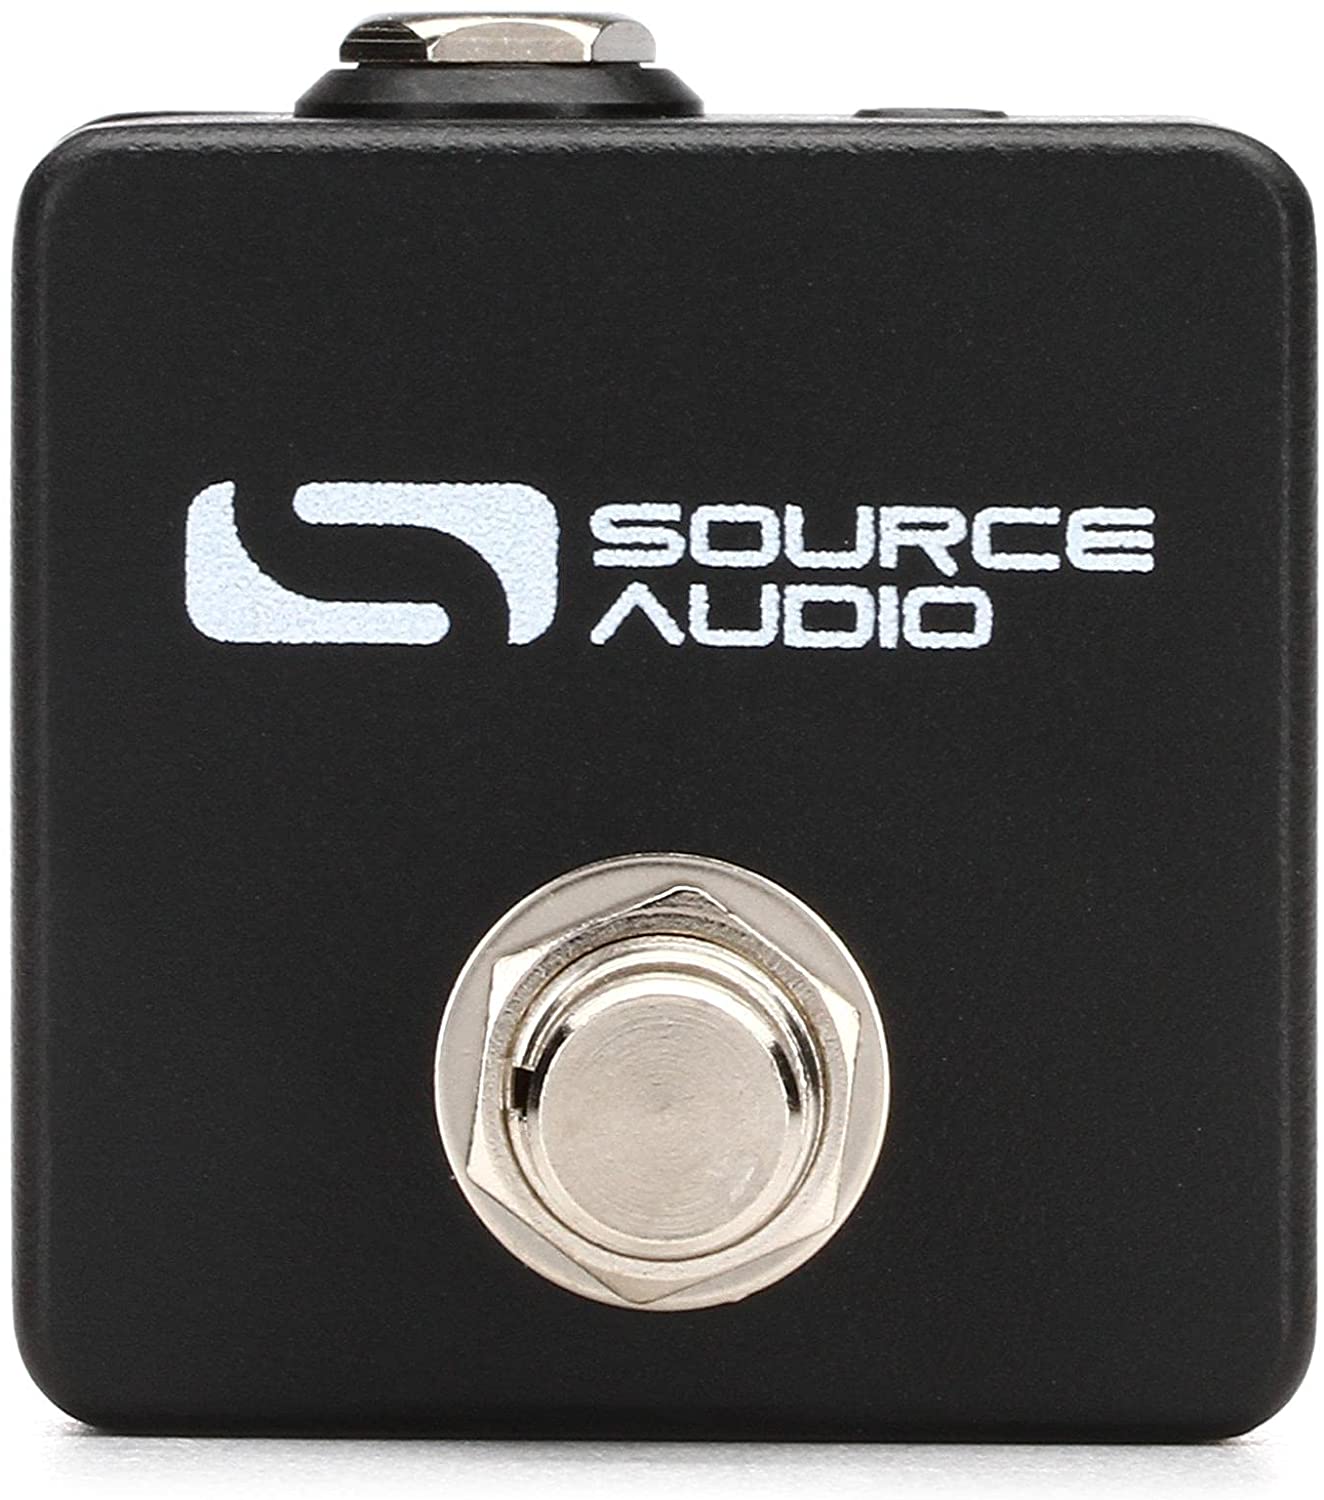 Source Audio One Series True Spring Reverb with Tap Tempo Switch